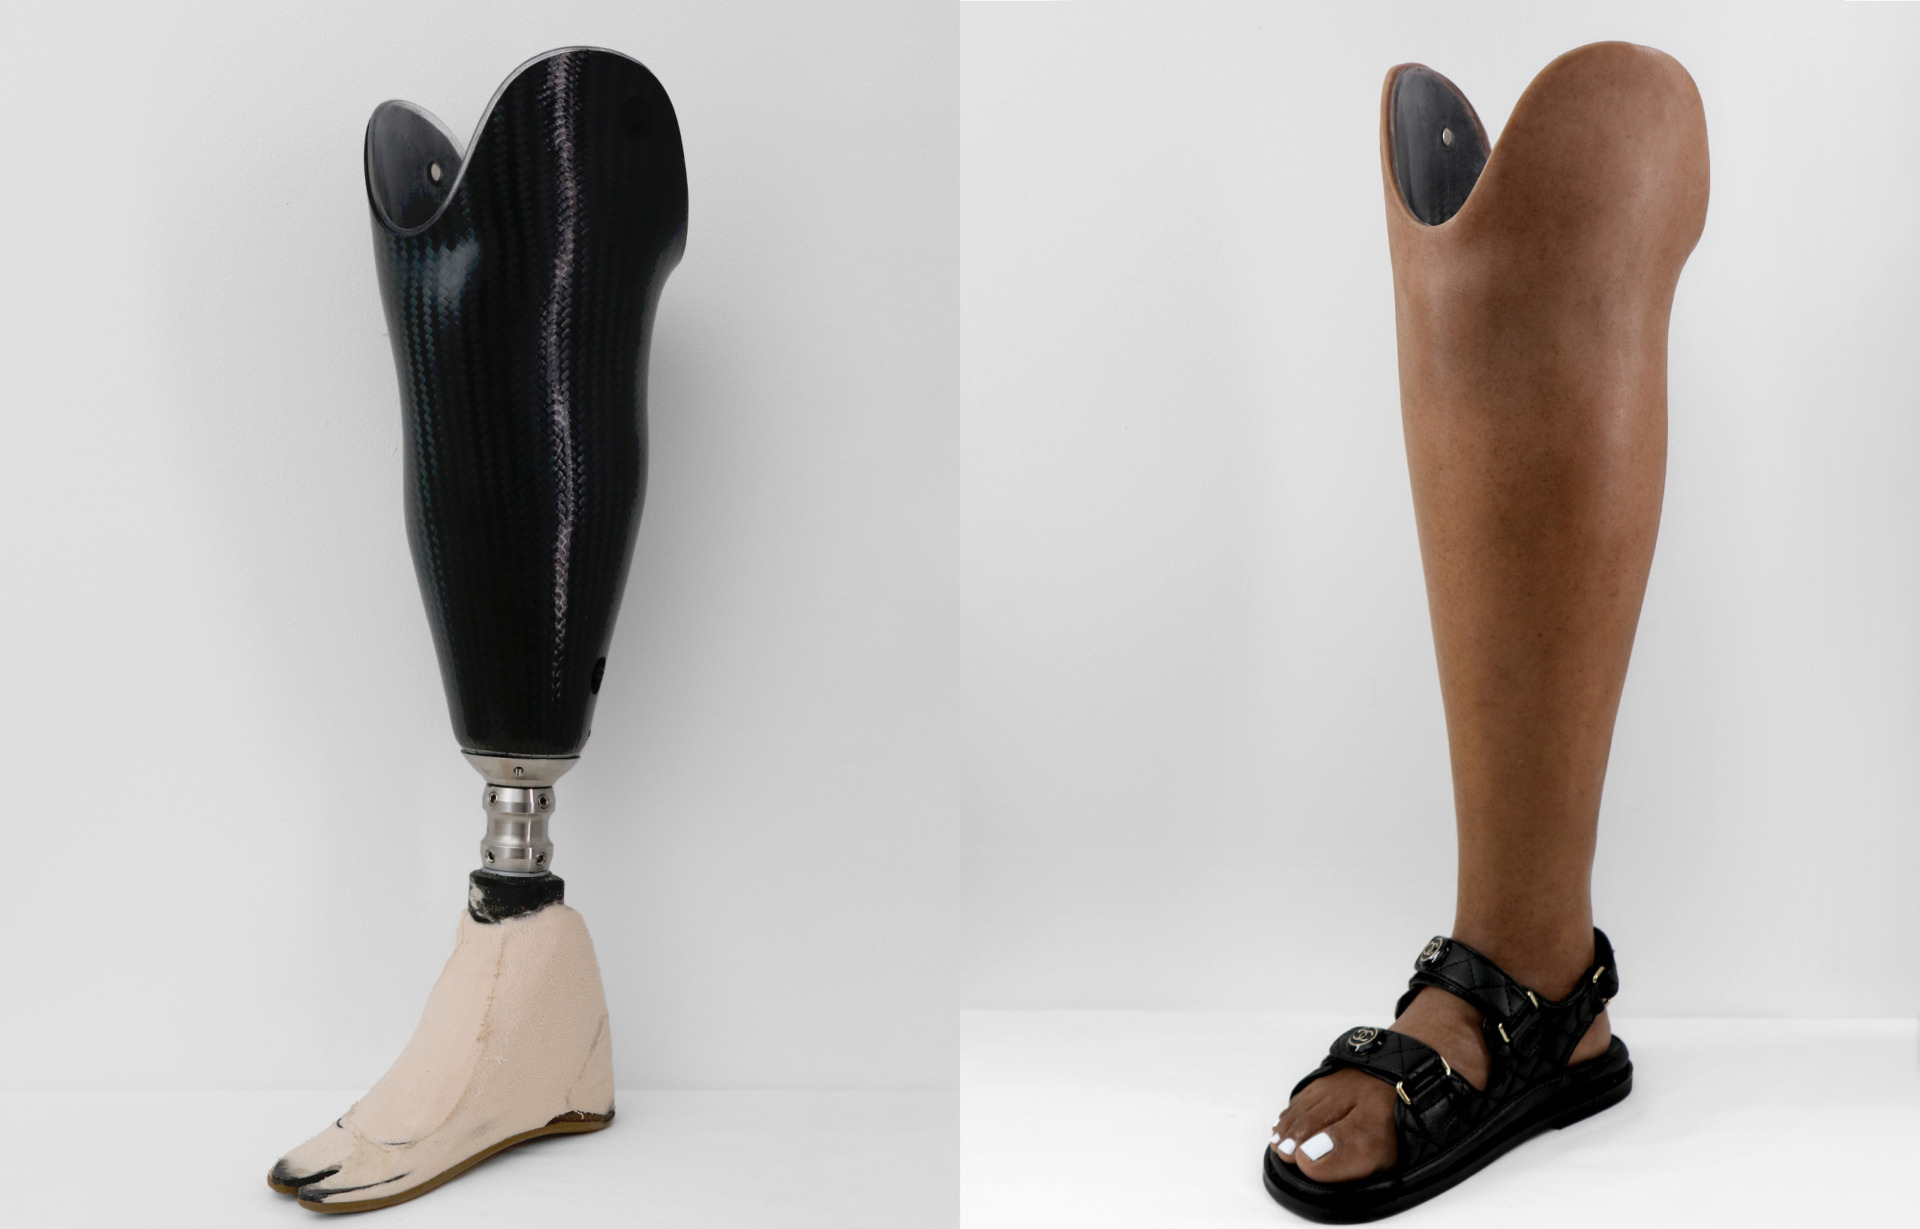 Premium Ready-to-Wear Protective Skin Cover for Below-Knee Prostheses